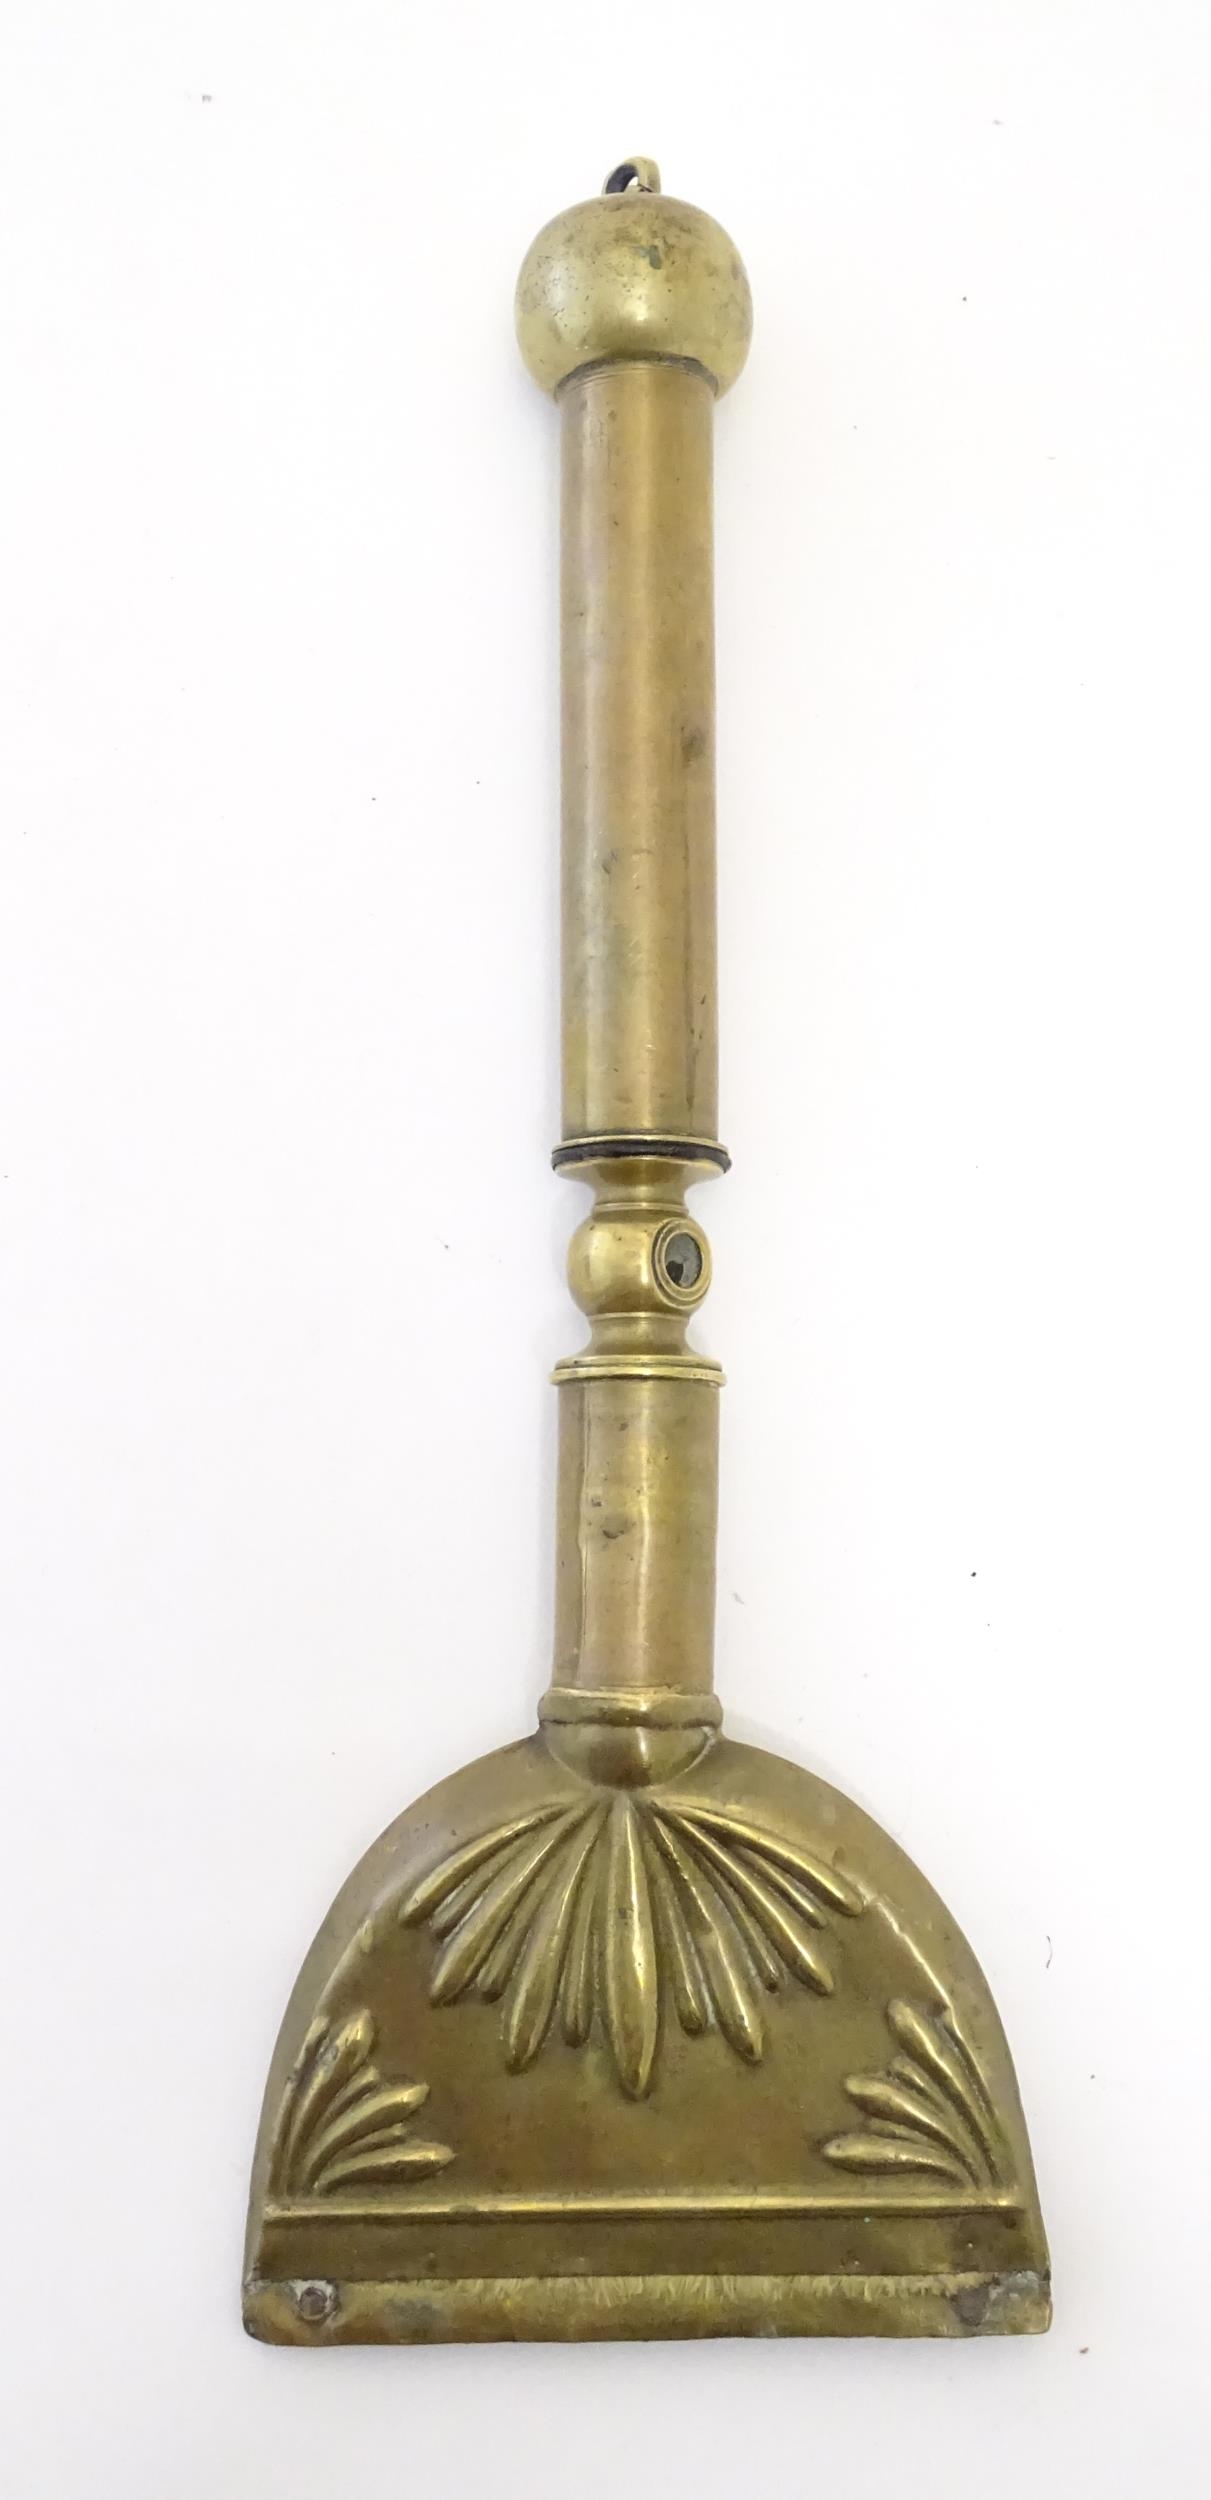 A 19thC brass horse hair singer / singeing lamp with embossed shell detail. Approx. 13 3/4" long - Image 2 of 6